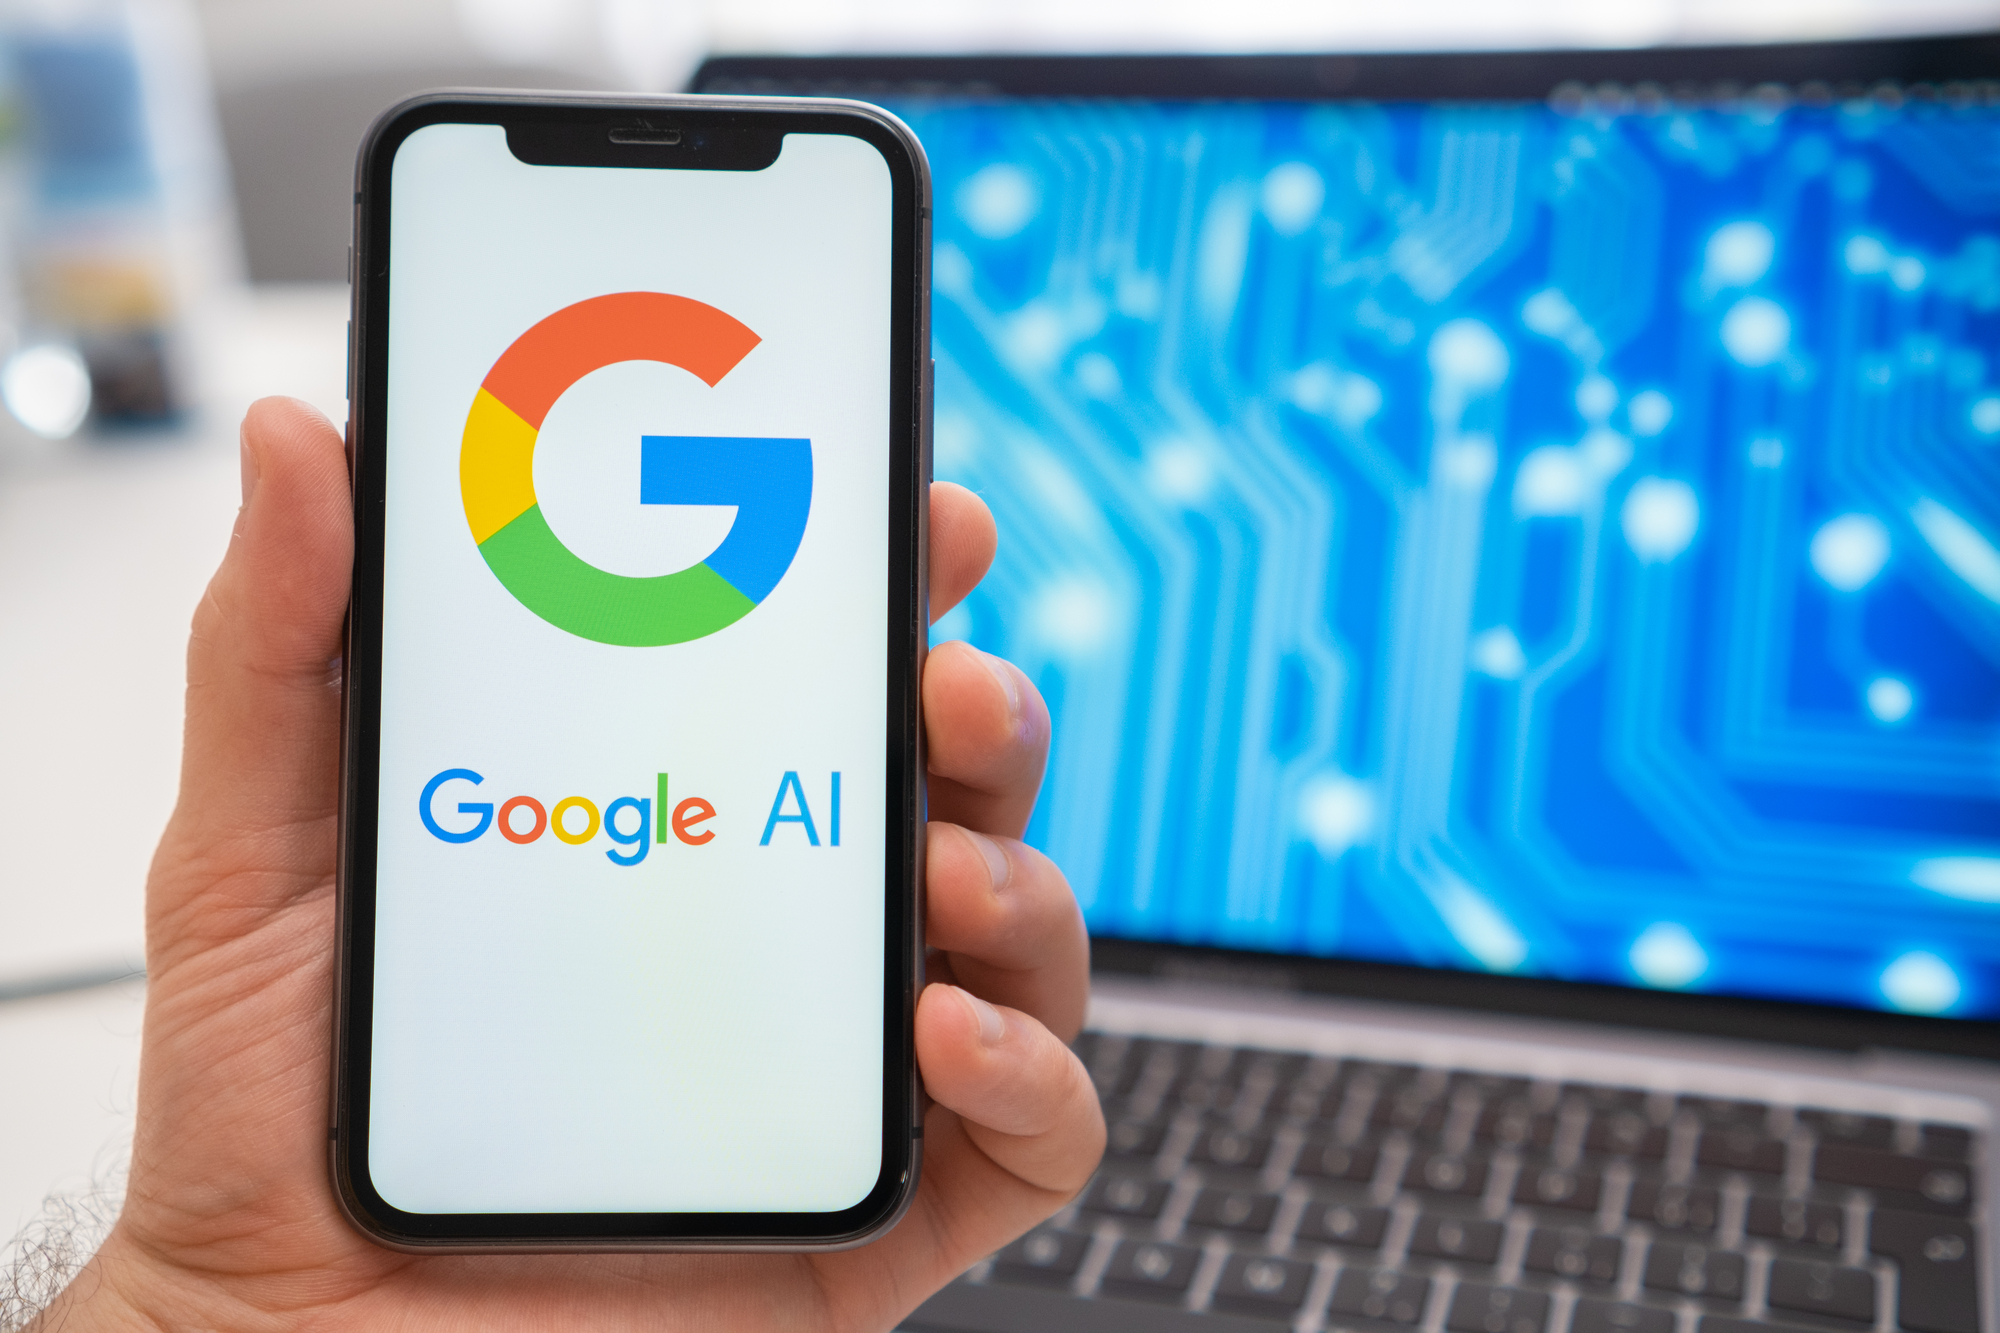 Google AI artificial intelligence logo on the screen of mobile phone